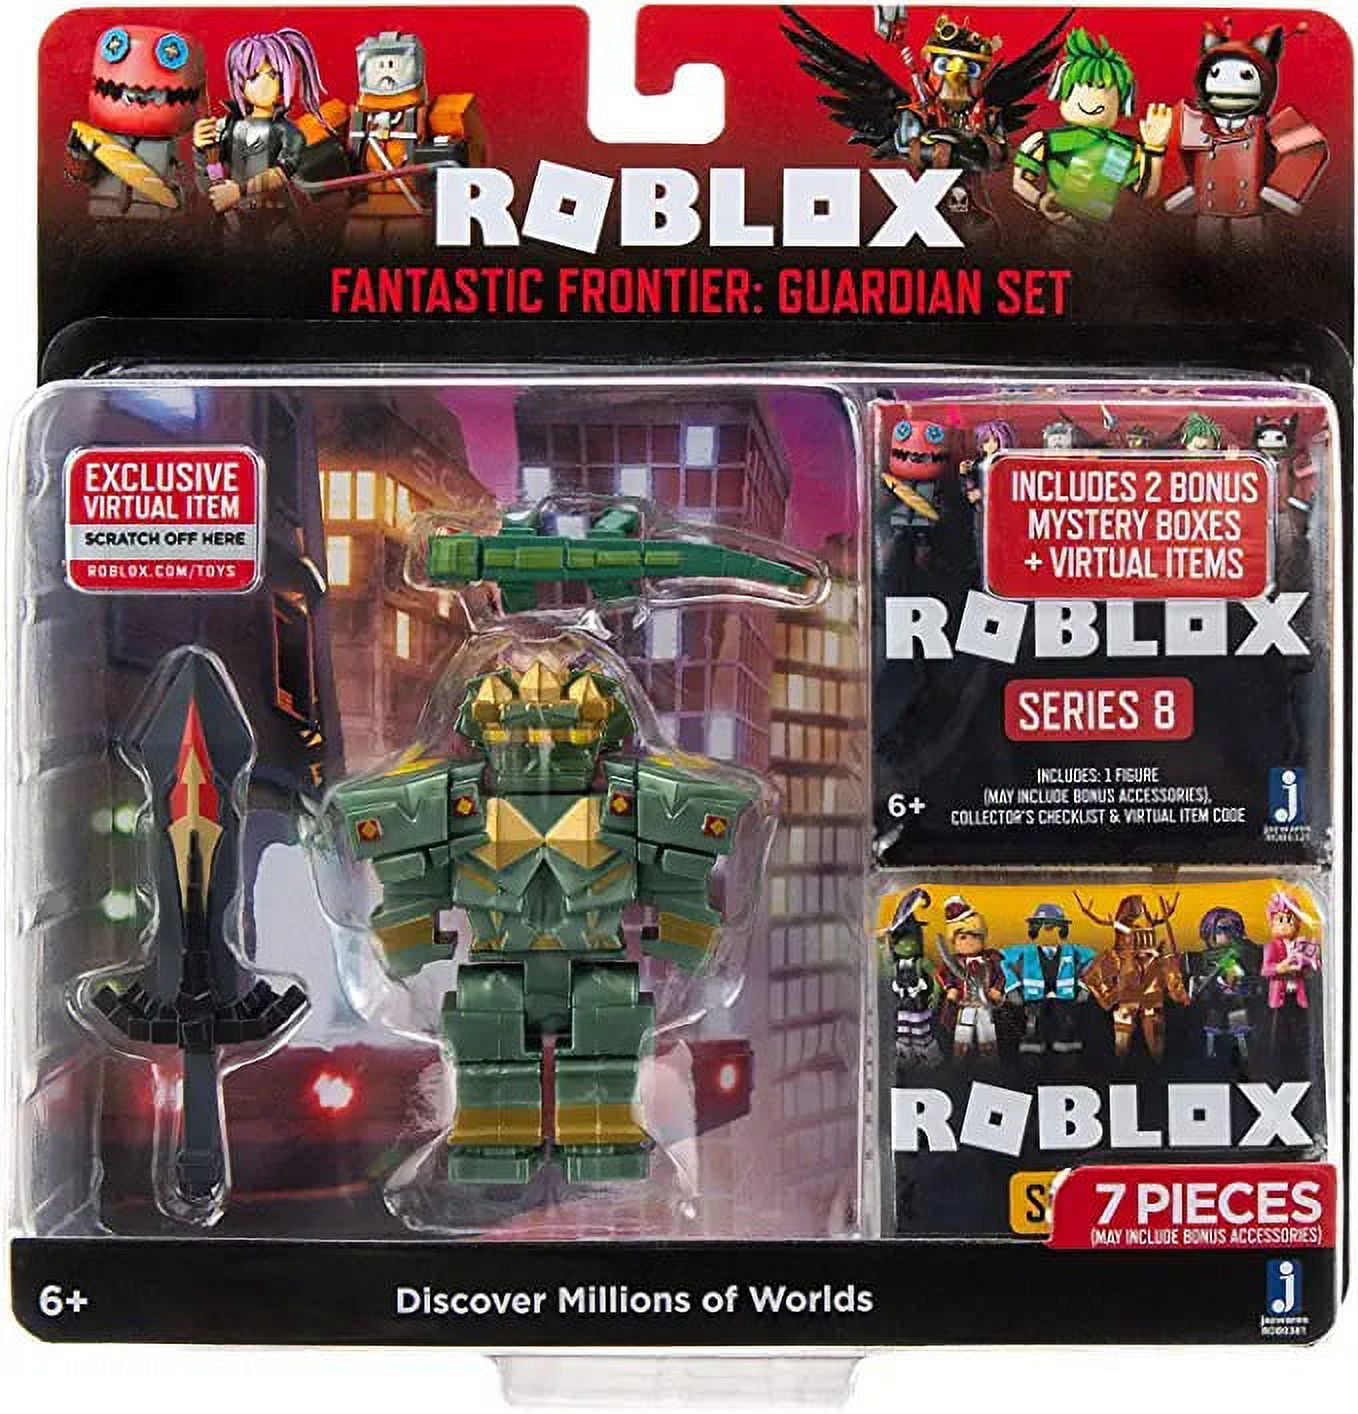 New Google Device Exclusive Roblox Items! Roblox Exclusive Android